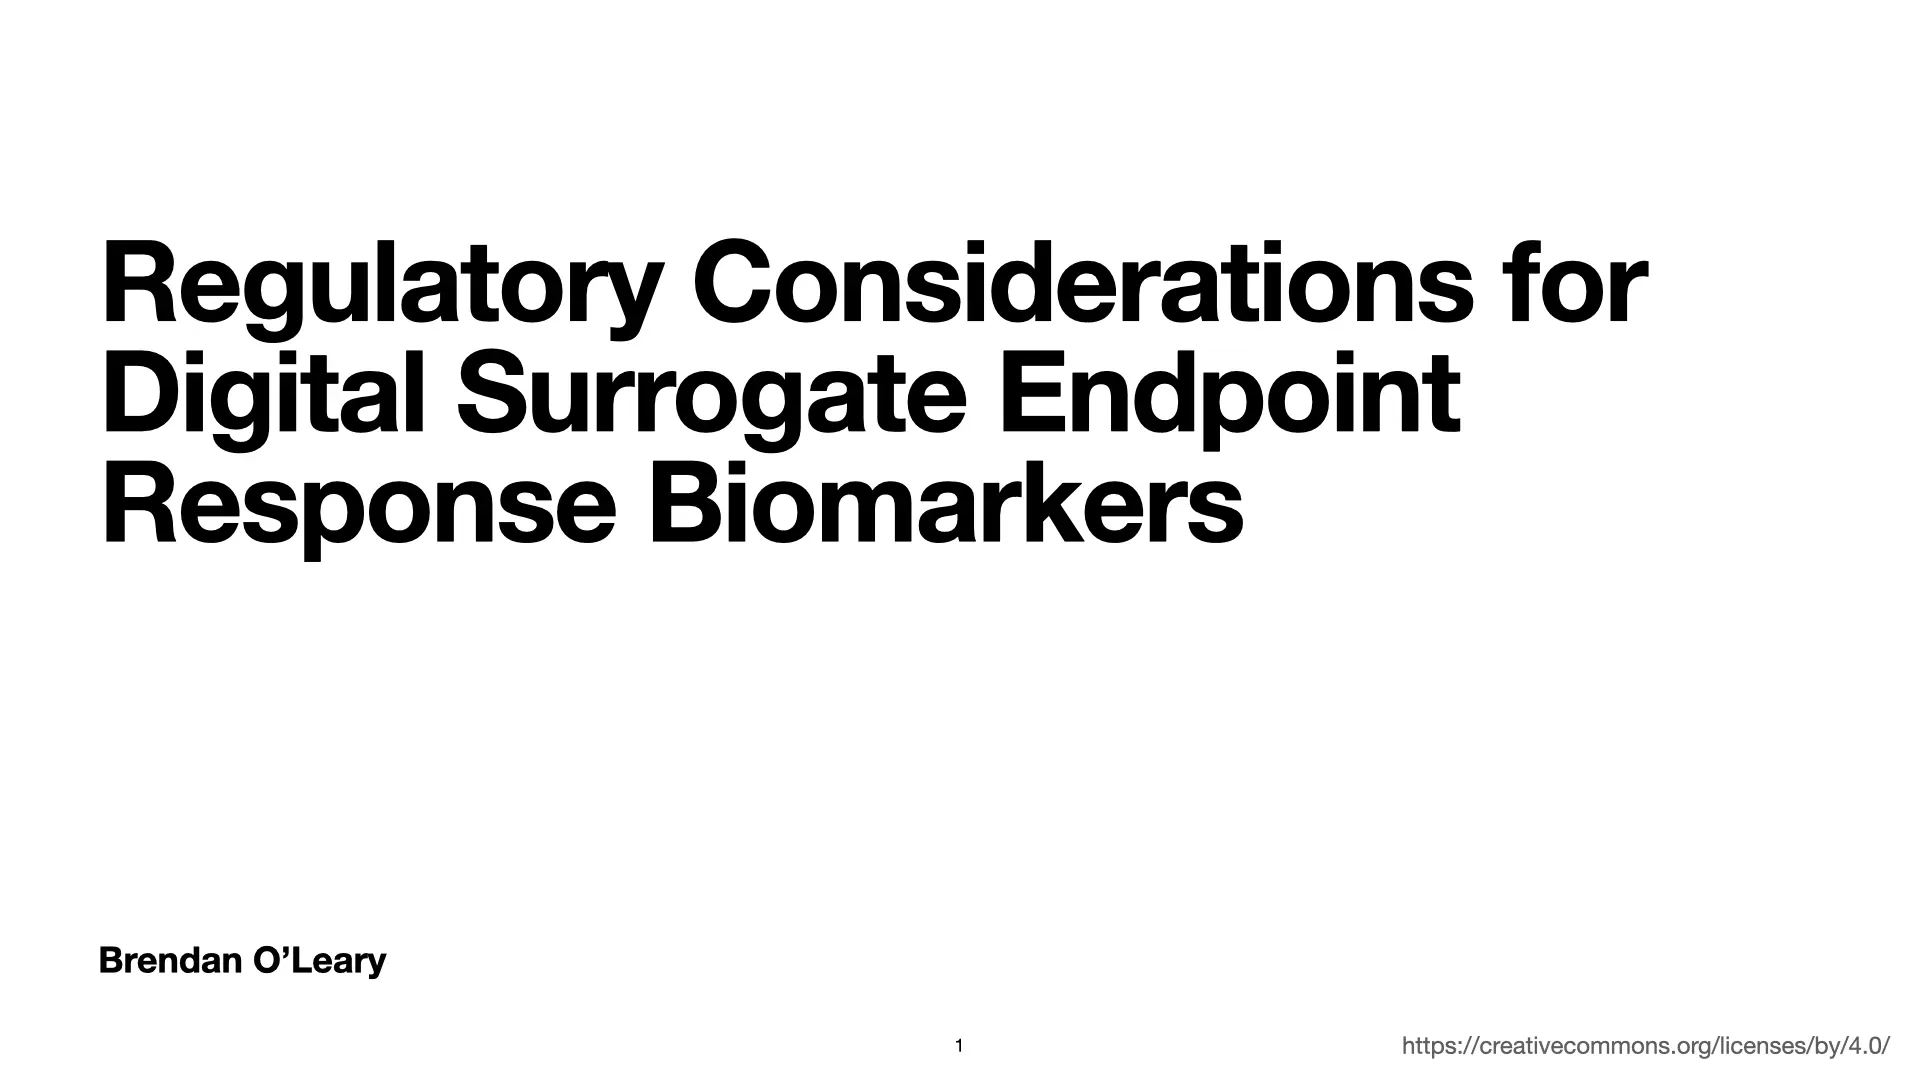 Slide 1: Regulatory Considerations for Digital Surrogate Endpoint Response Biomarkers. By Brendan O'Leary